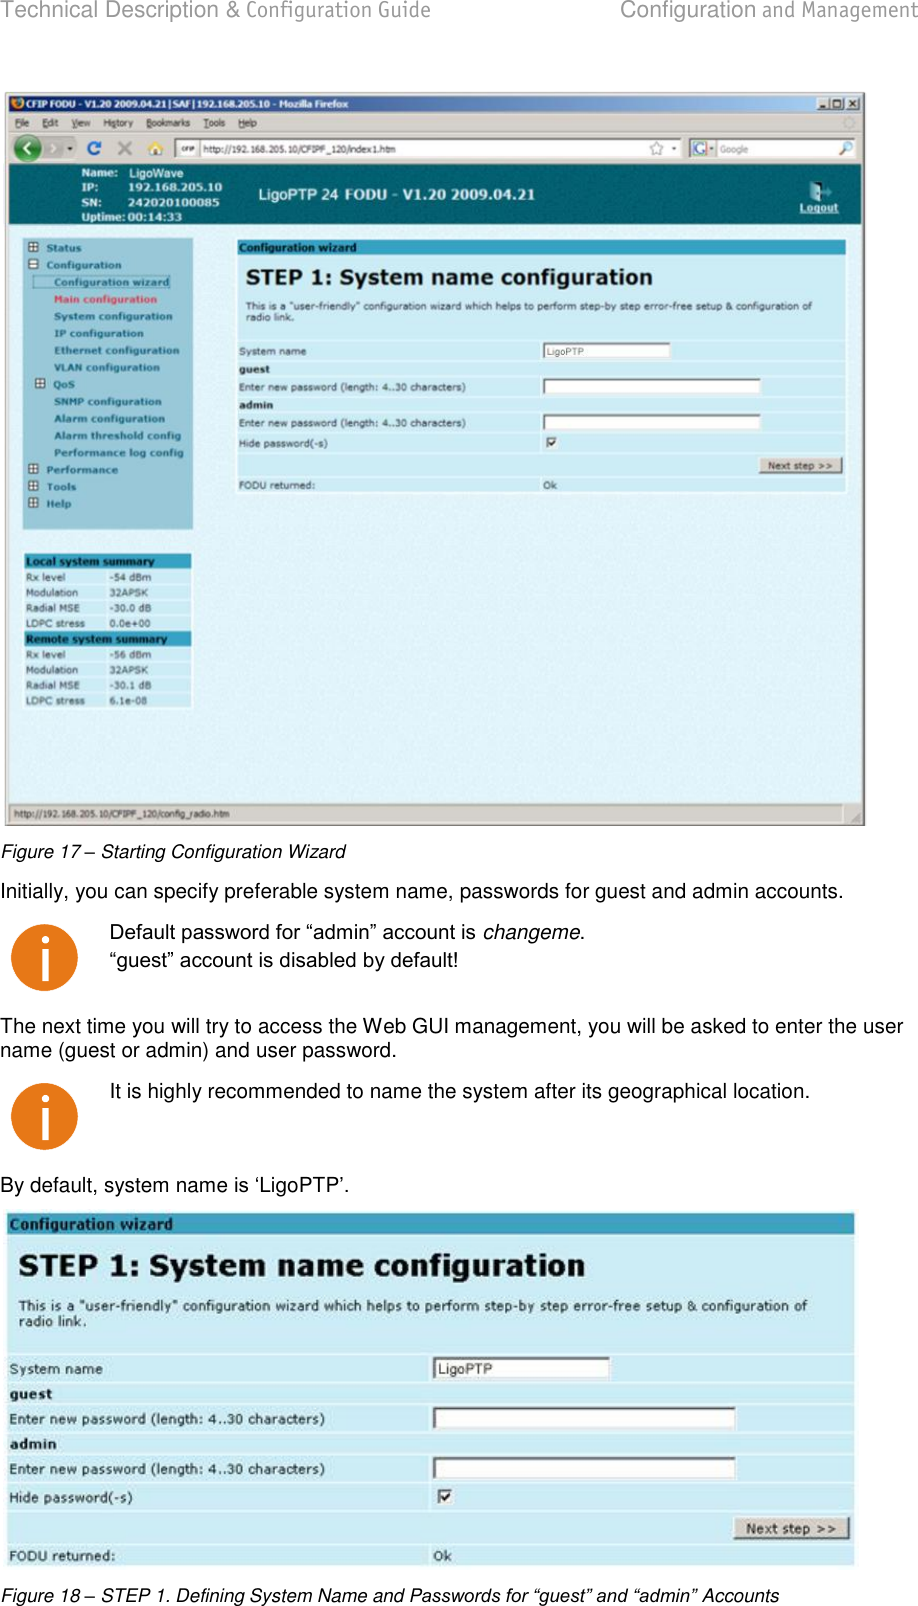 Technical Description &amp; Configuration Guide  Configuration and Management  LigoWave  Page 25  Figure 17 – Starting Configuration Wizard Initially, you can specify preferable system name, passwords for guest and admin accounts.  changeme.  The next time you will try to access the Web GUI management, you will be asked to enter the user name (guest or admin) and user password.  It is highly recommended to name the system after its geographical location. By default, system name LigoPTP  Figure 18 – STEP 1. Defining System Name and Passwords for “guest” and “admin” Accounts 